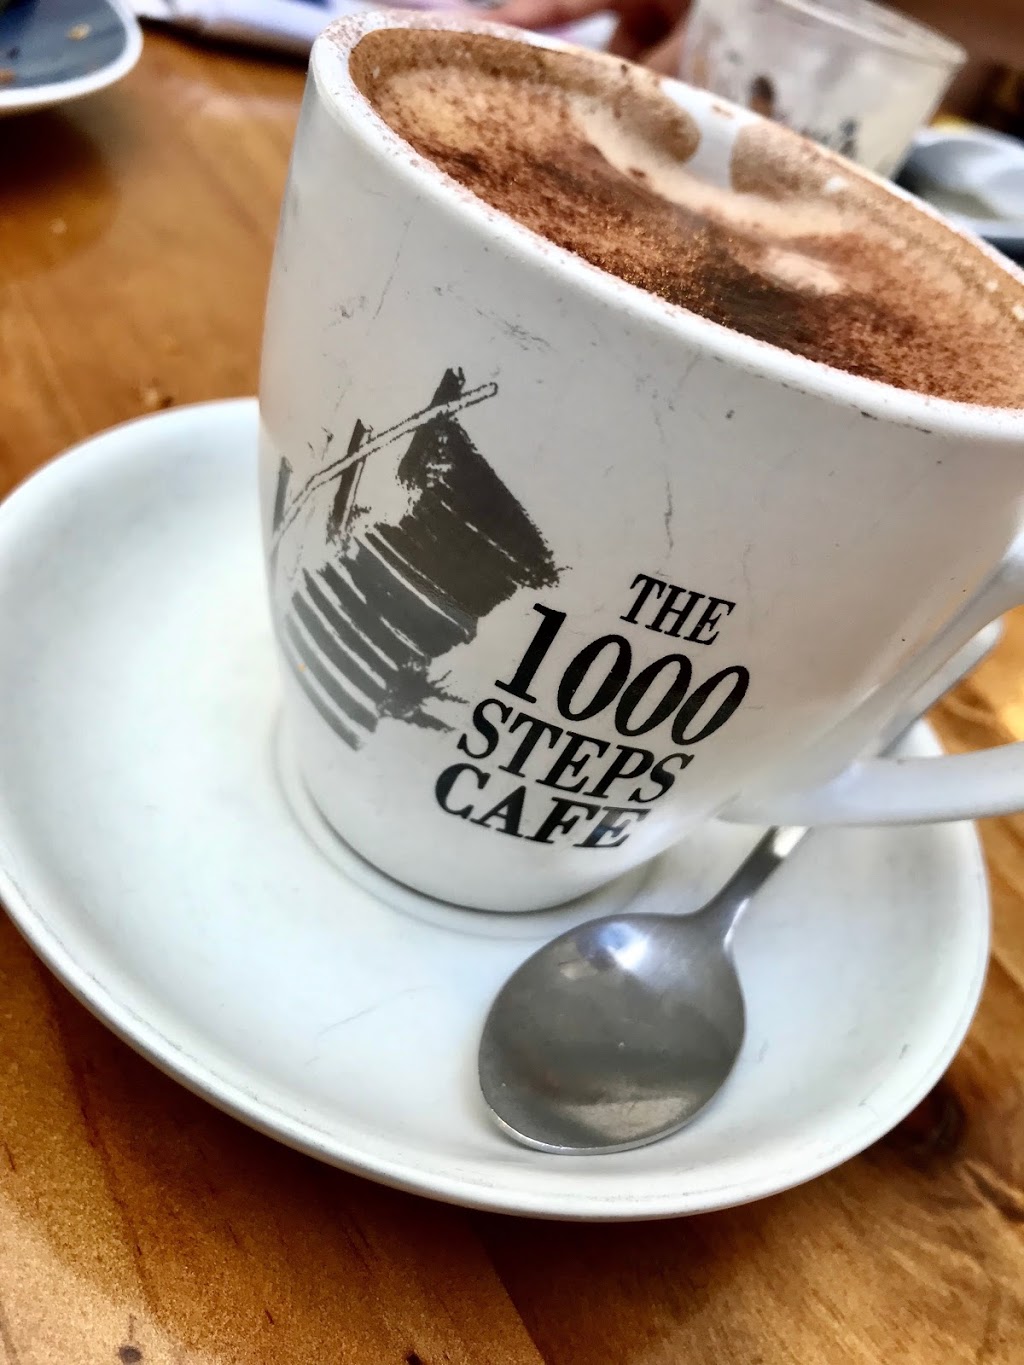 The 1000 Steps Cafe | cafe | Mount Dandenong Tourist Rd, Upper Ferntree Gully VIC 3156, Australia | 0397535633 OR +61 3 9753 5633